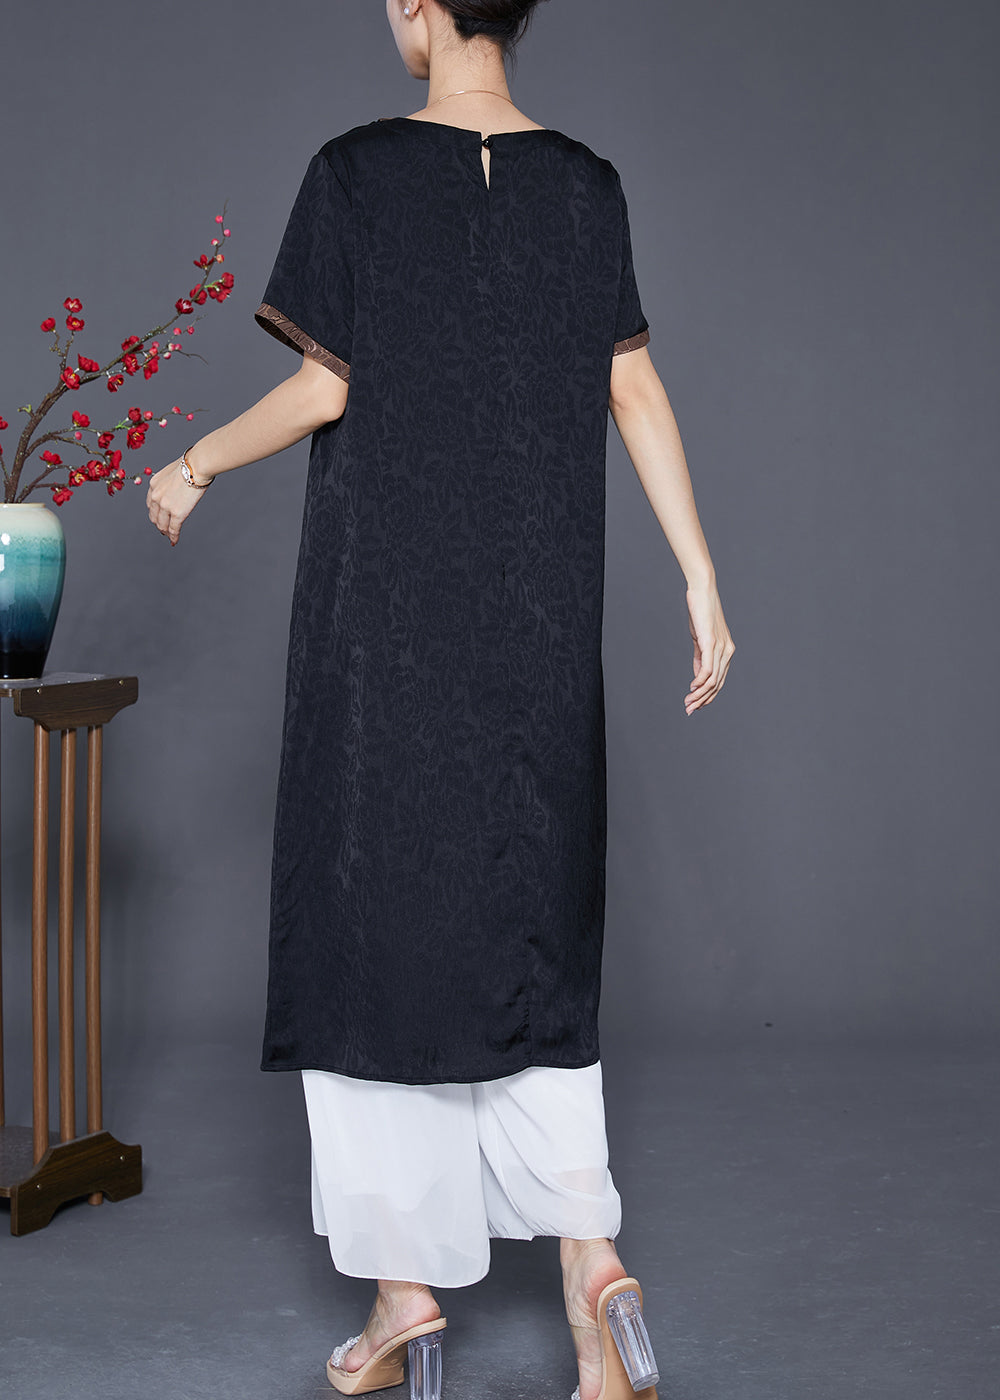 Fine Black Embroideried Hollow Out Silk Long Dresses Summer Ada Fashion